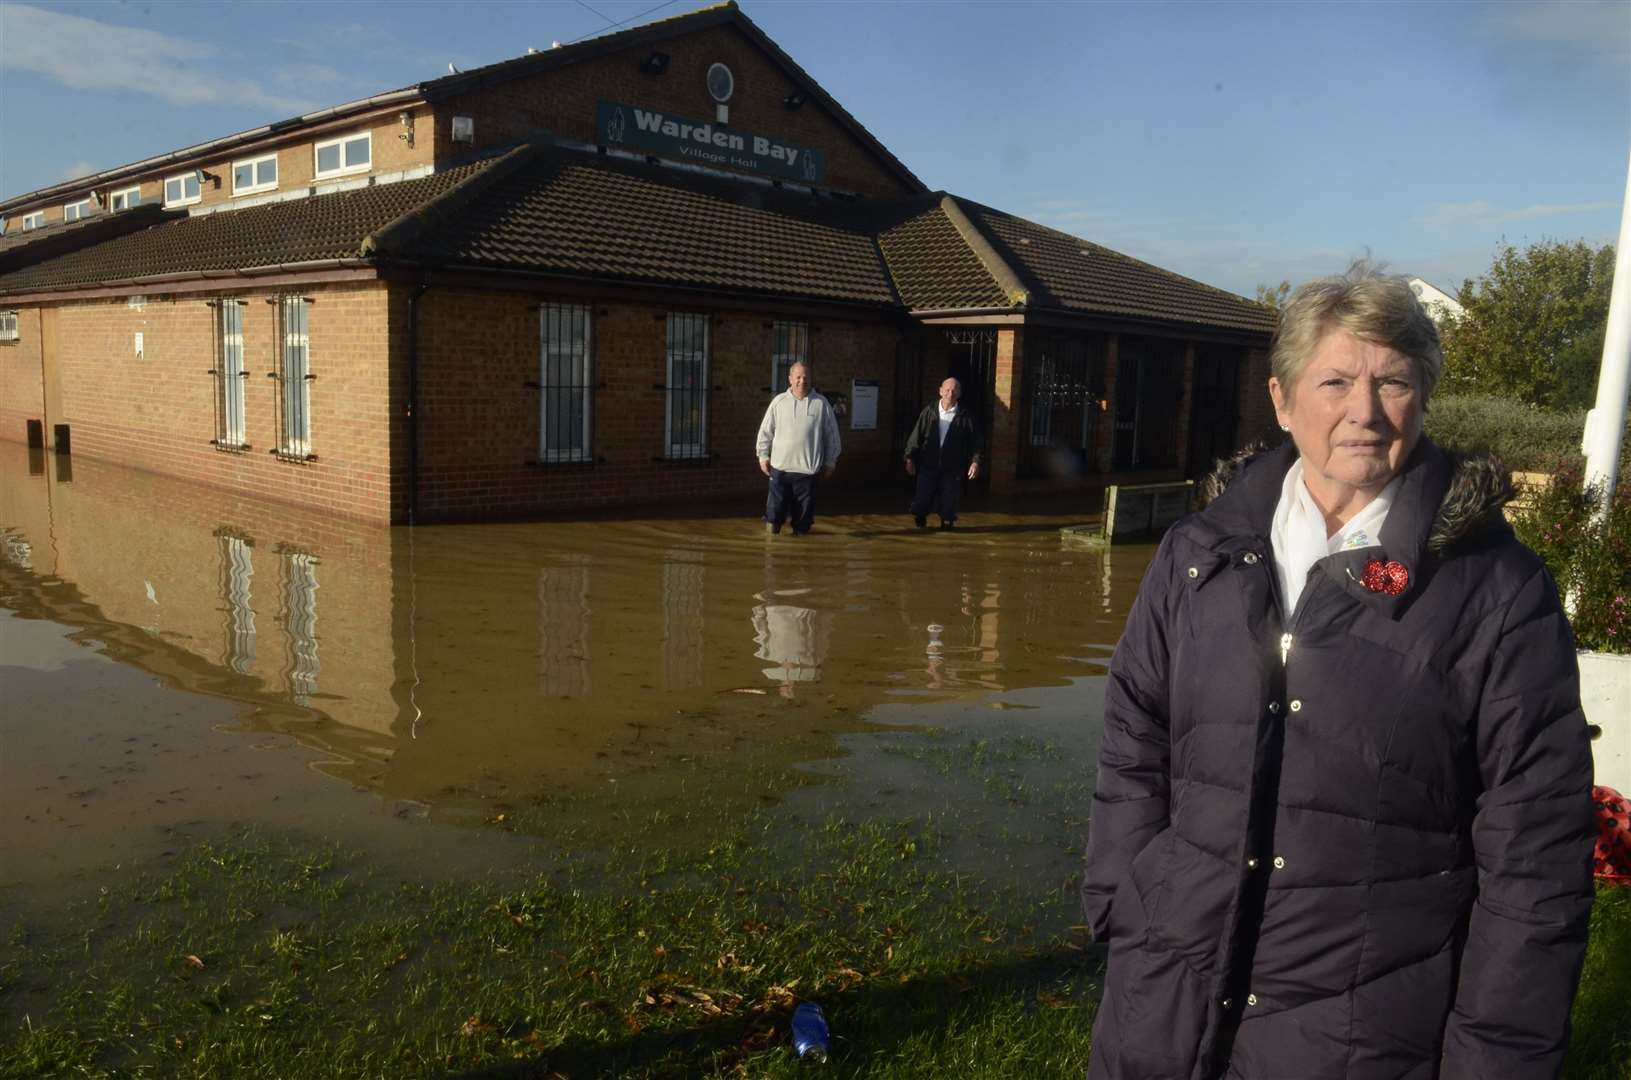 Cllr Pat Sandle outside a flooded Warden Bay Village Hall in 2014